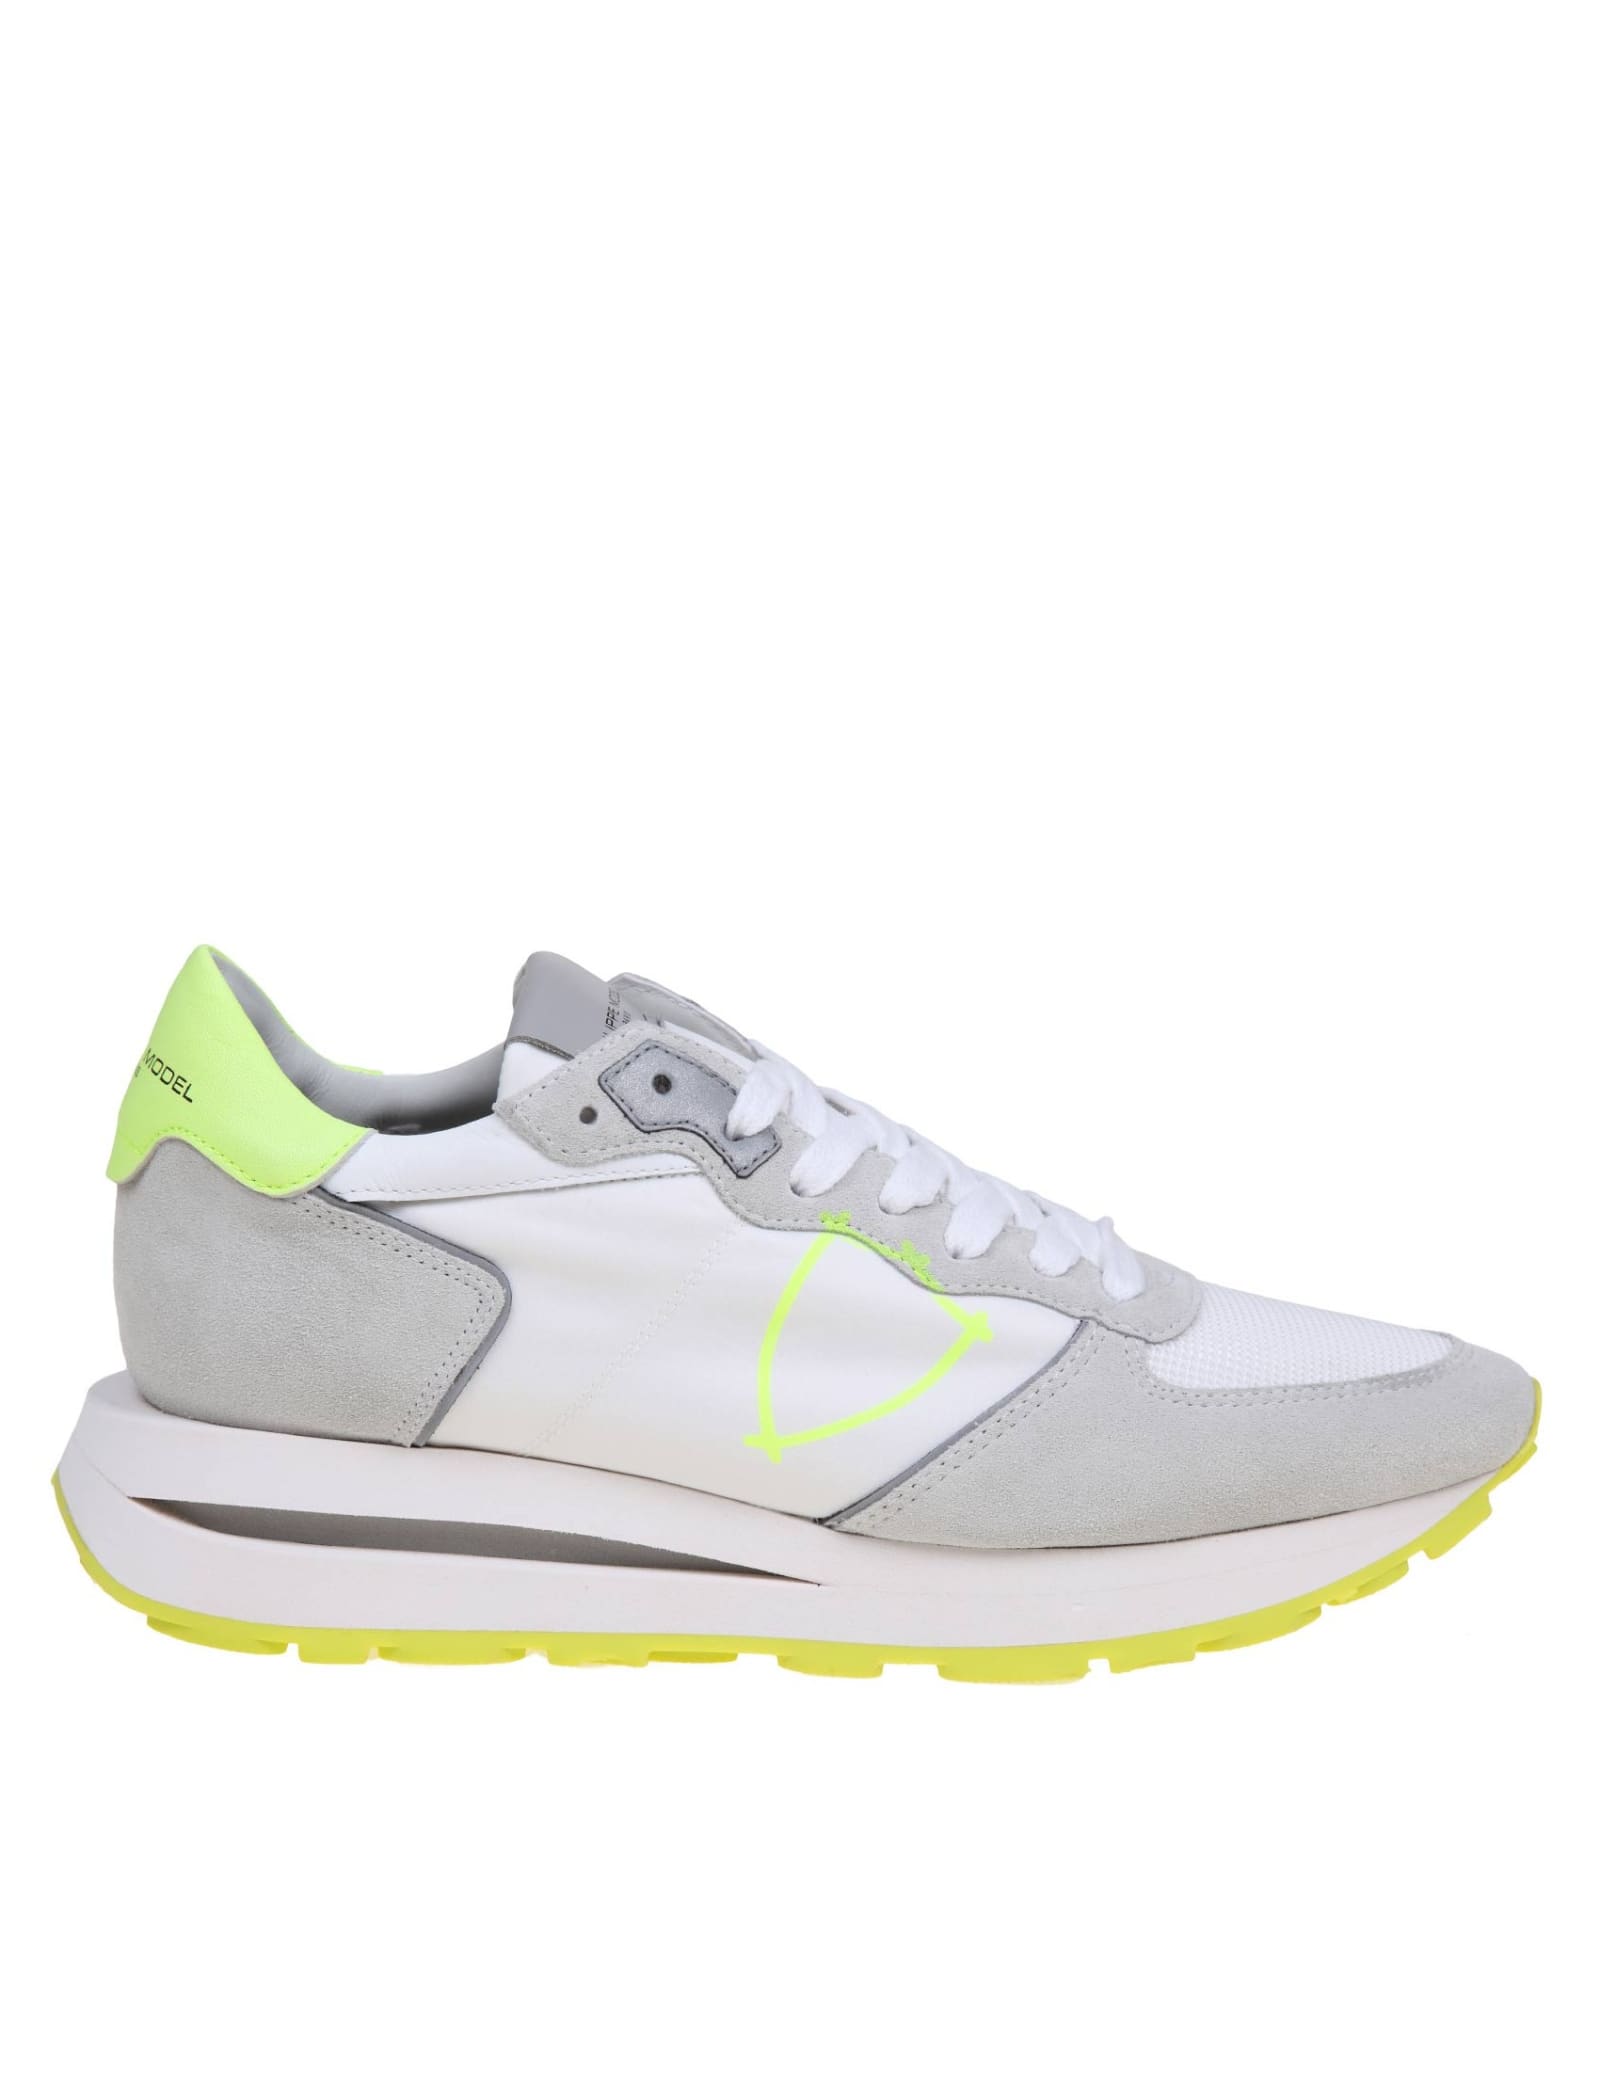 Philippe Model Tropez Haute Low Trainers In Suede And Nylon Colour White And Yellow In Blanc/jaune